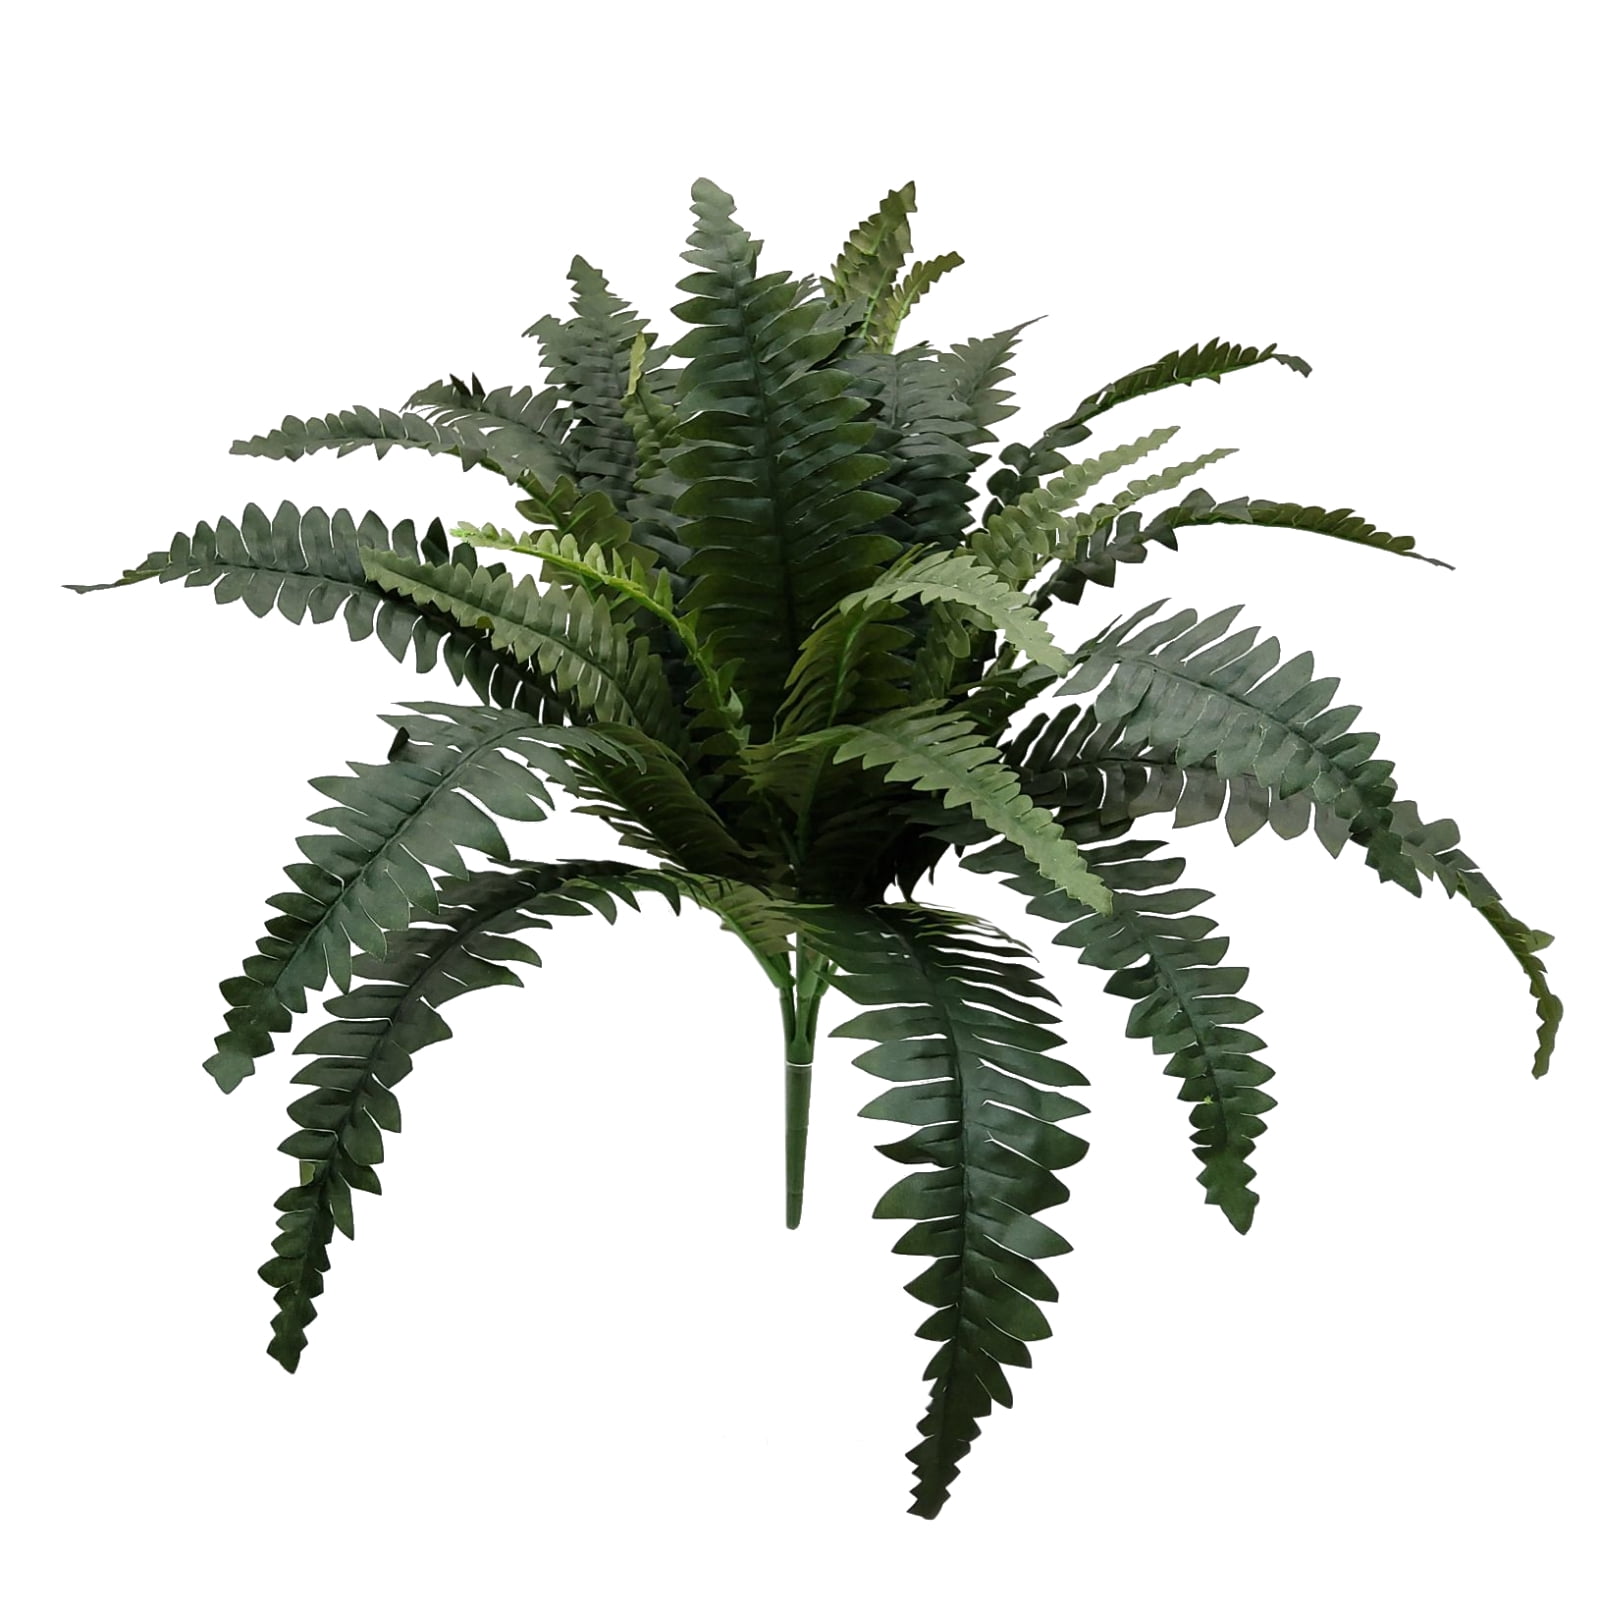 Mainstays 21" Height Artificial Plant, Fern Bush, Green Color.